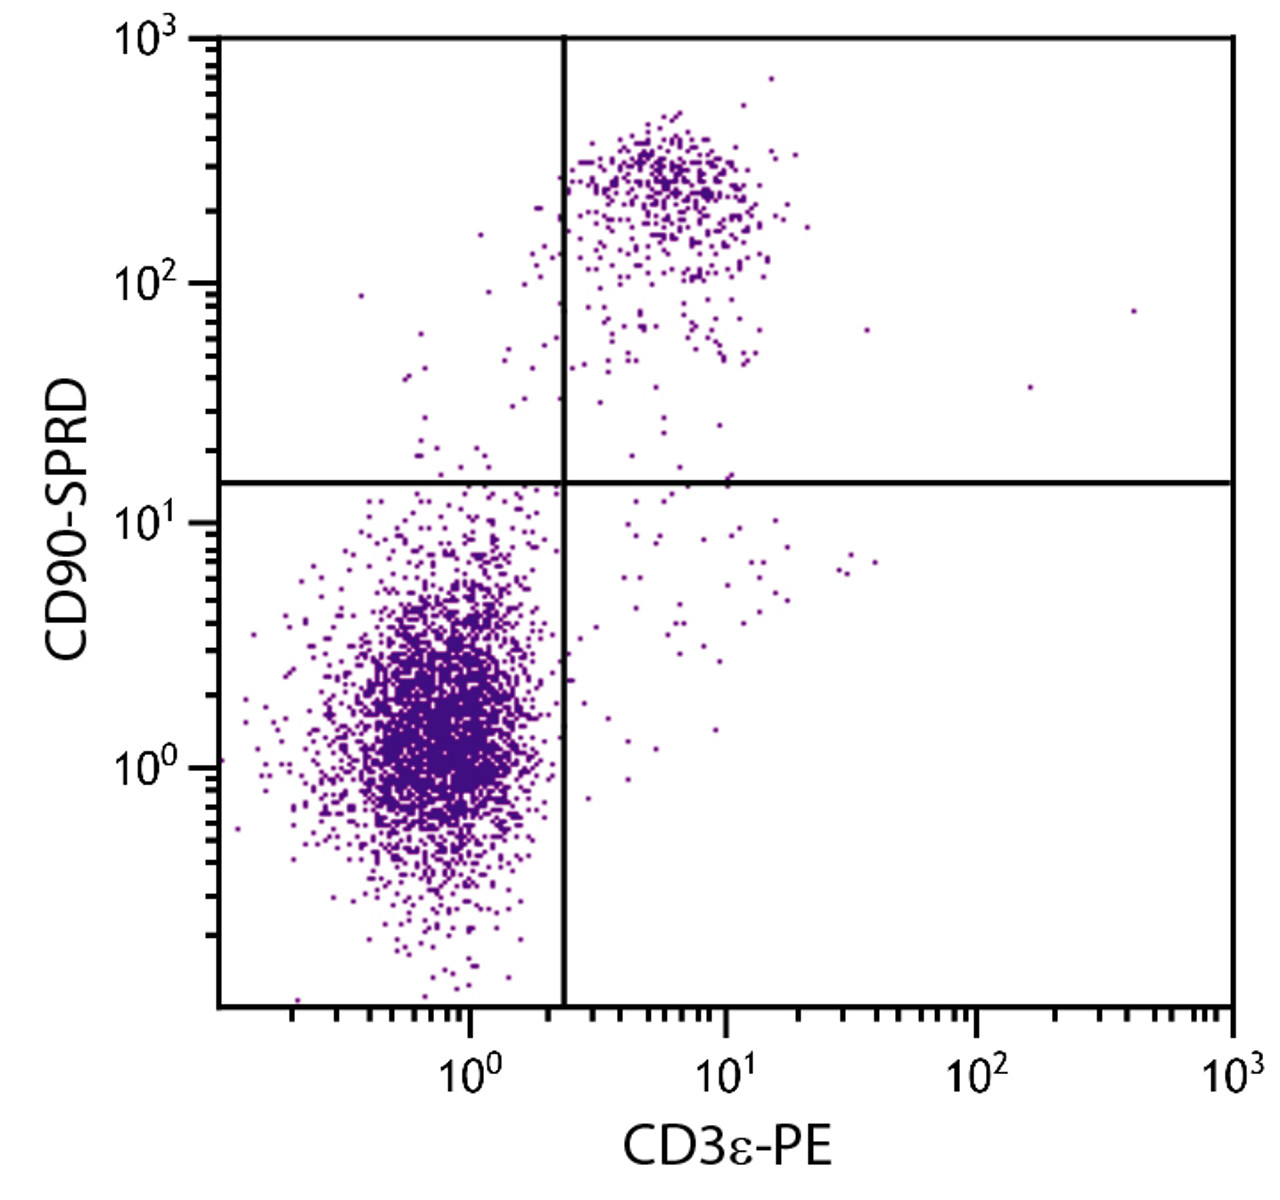 C57BL/6 mouse splenocytes were stained with Rat Anti-Mouse CD90-SPRD (Cat. No. 98-865) and Rat Anti-Mouse CD3?-PE .